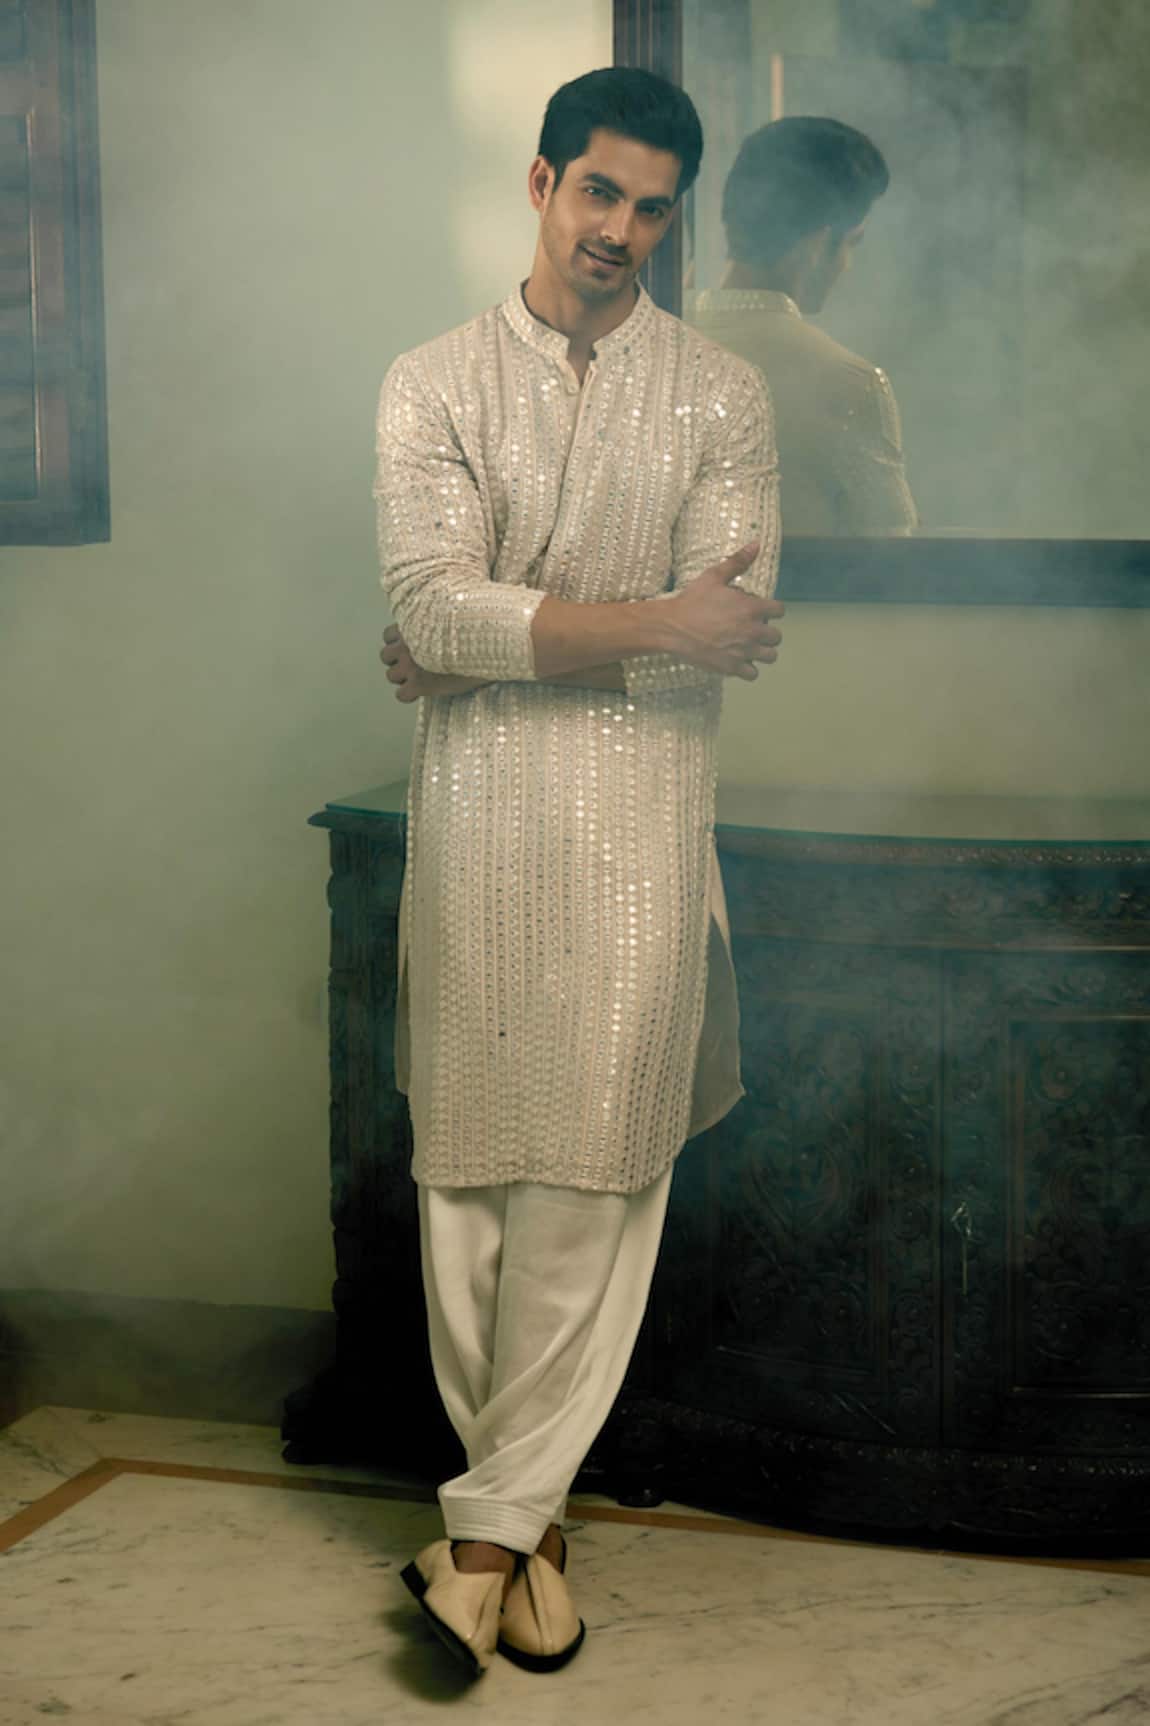 Grab The Attention With These Amazing Haldi Ceremony Outfits | Wedding  kurta for men, Haldi ceremony outfit, Dress suits for men